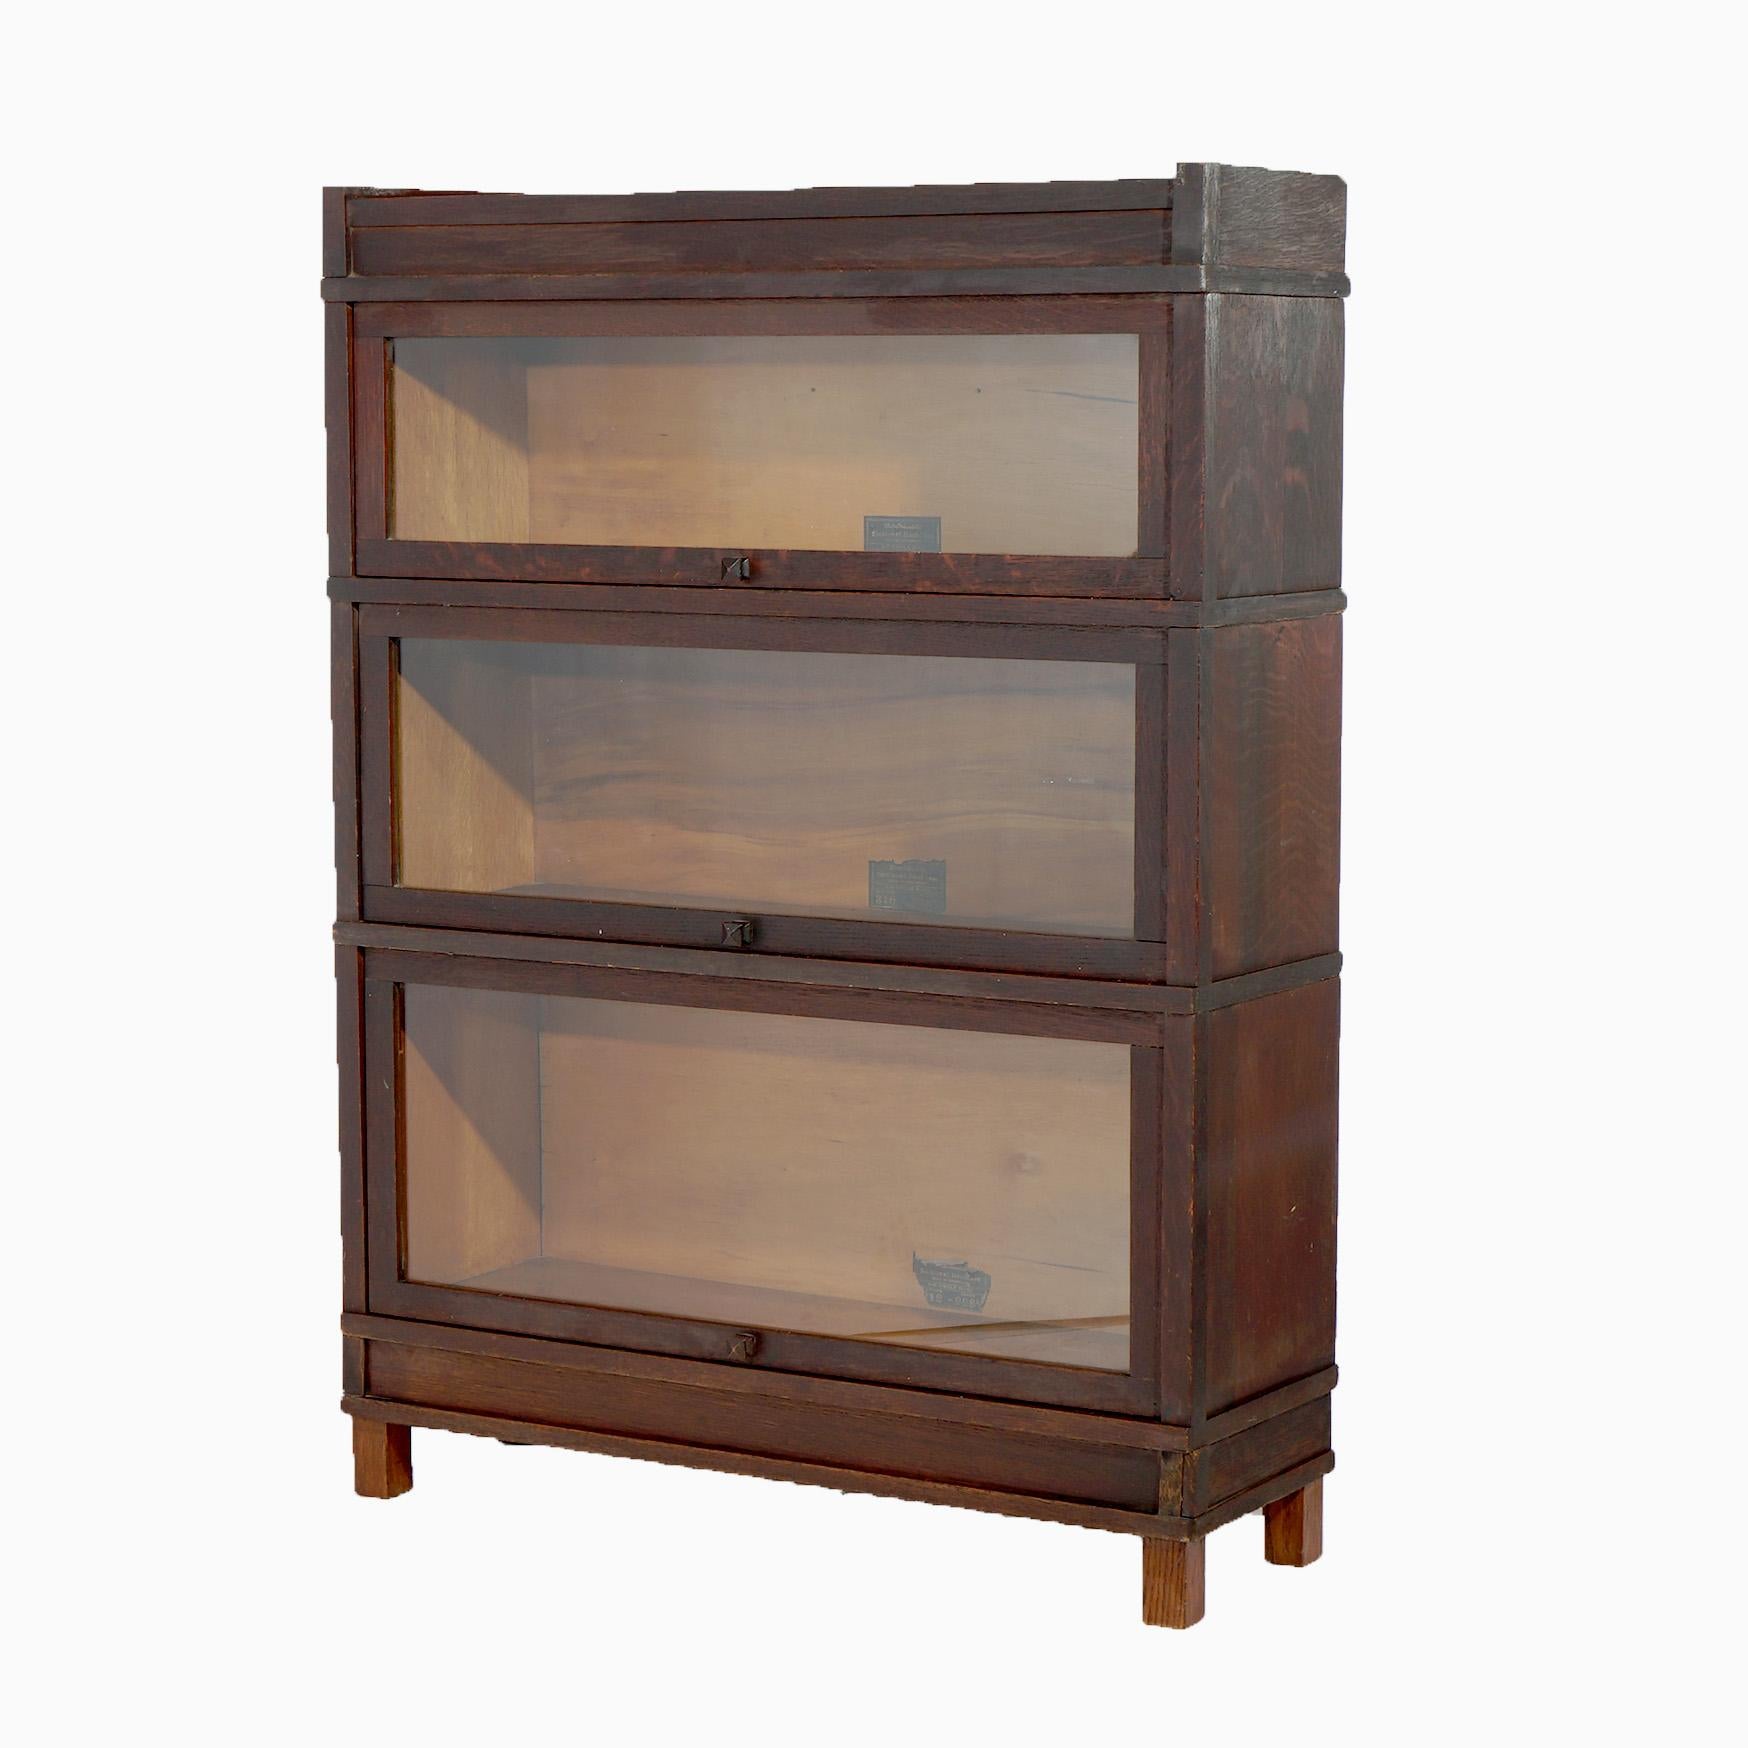 An antique Arts & Crafts barrister bookcase by Globe Wernicke offers oak construction with three stacks, each having pull-out glass doors, raised on square and straight legs, maker label as photographed, c1910
Measures - 47.25